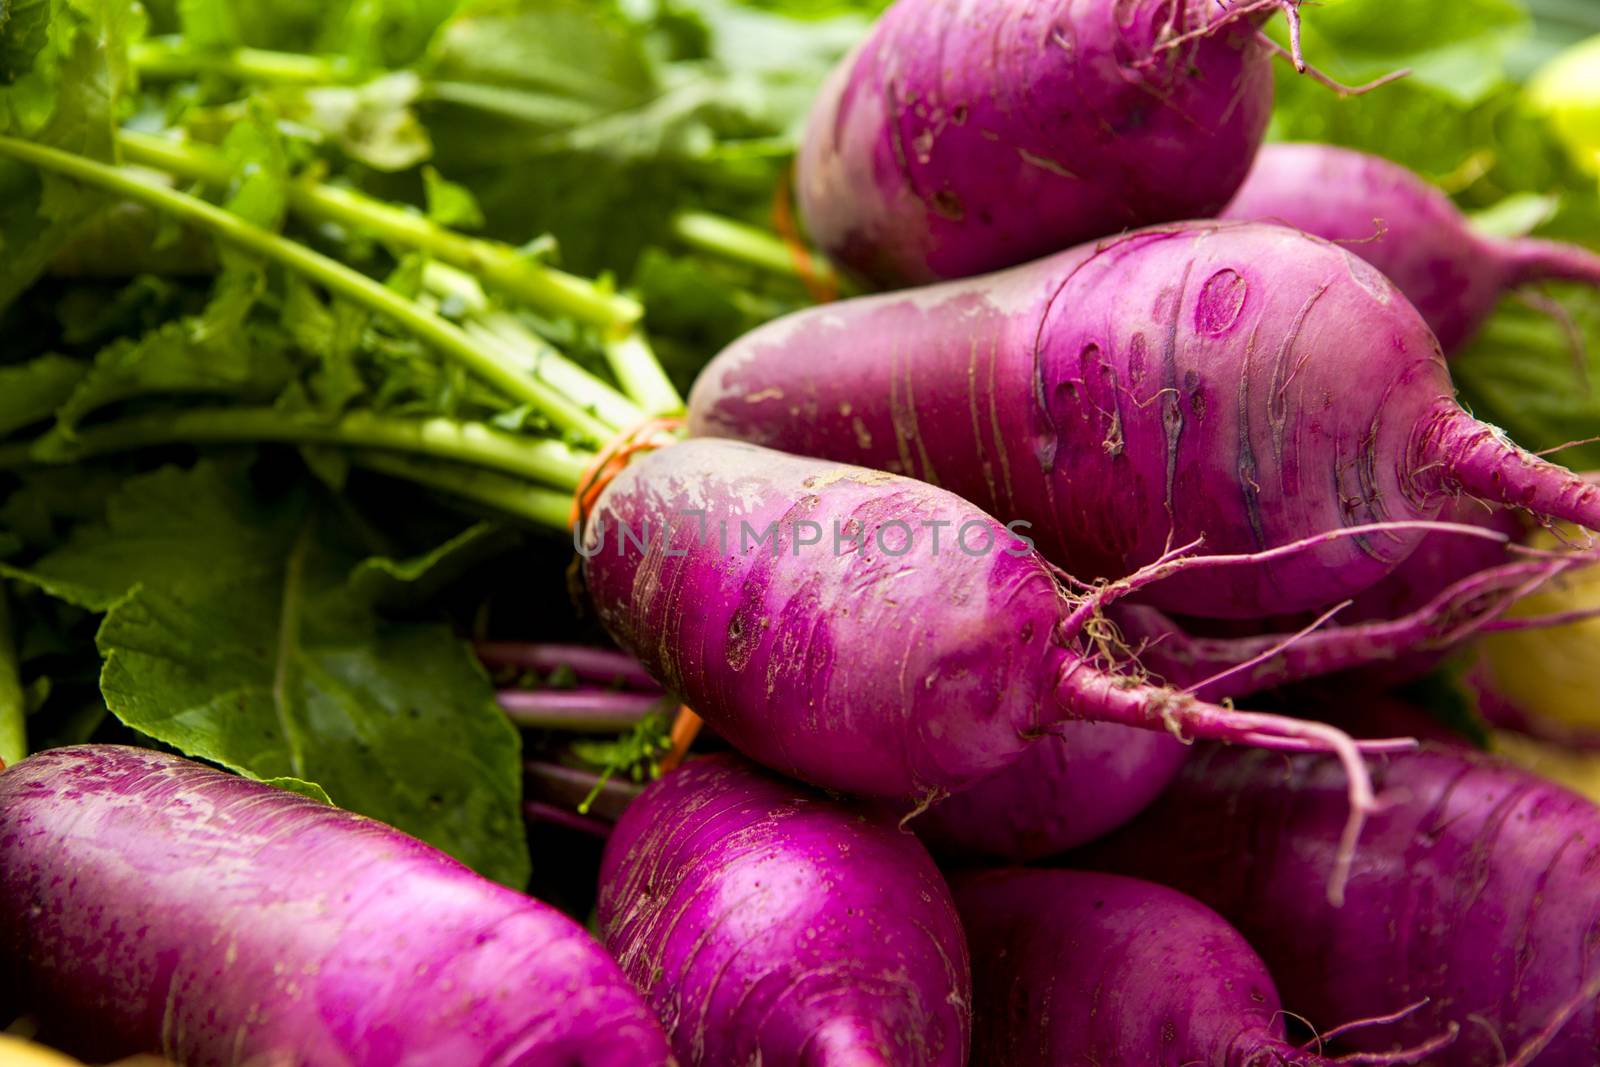 Organic turnips from a local market